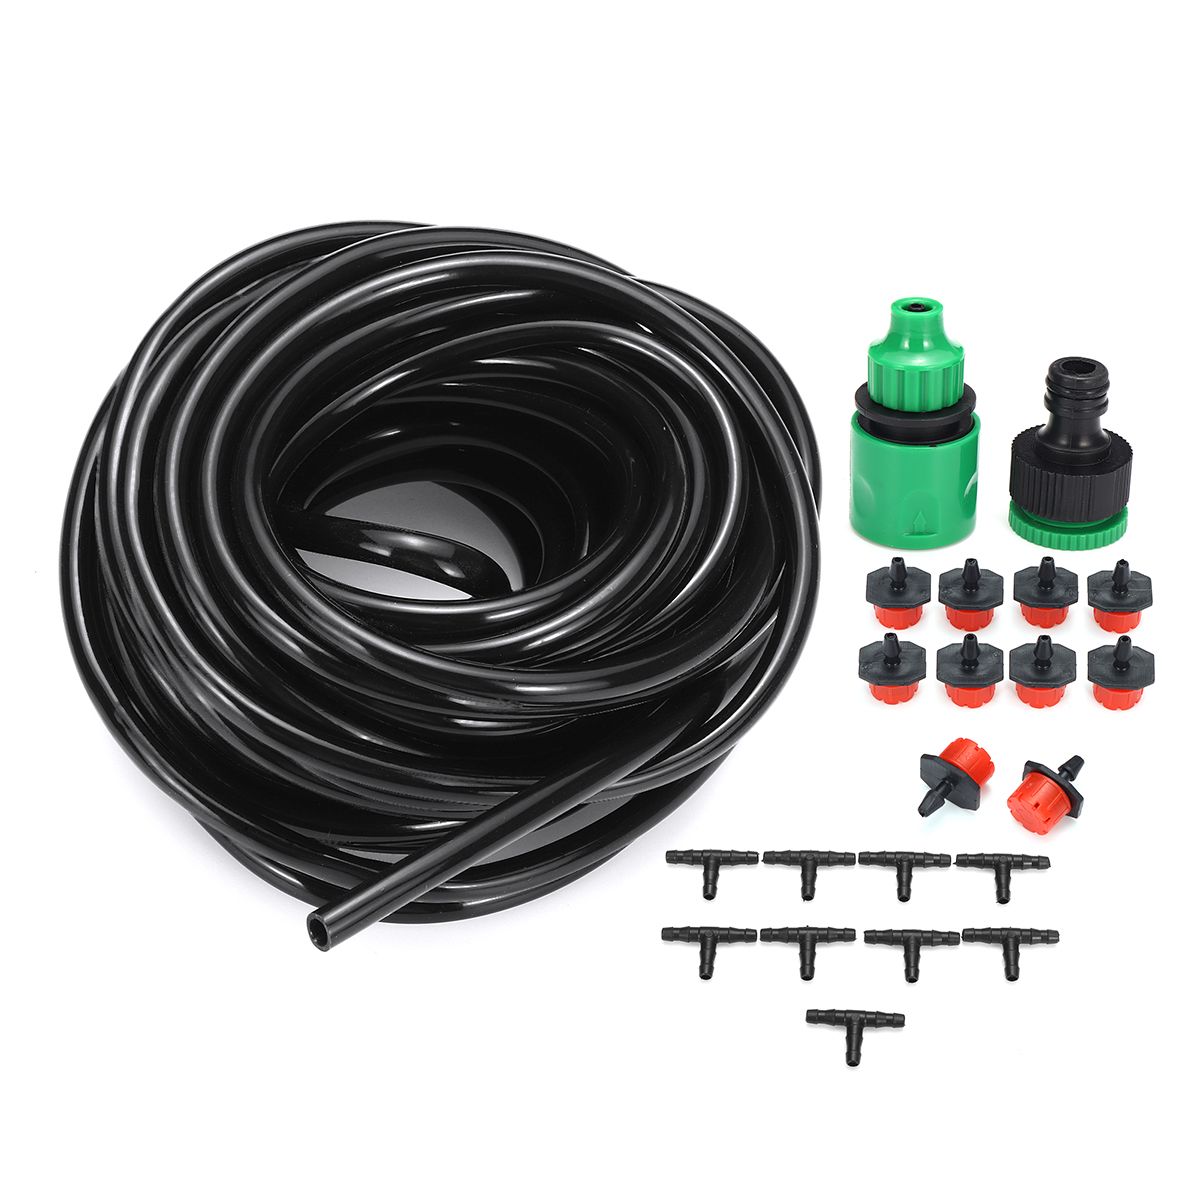 10m-Hose-Automatic-Sprinkler-Drippers-Micro-Irrigation-Drip-Plant-Watering-Garden-System-1667245